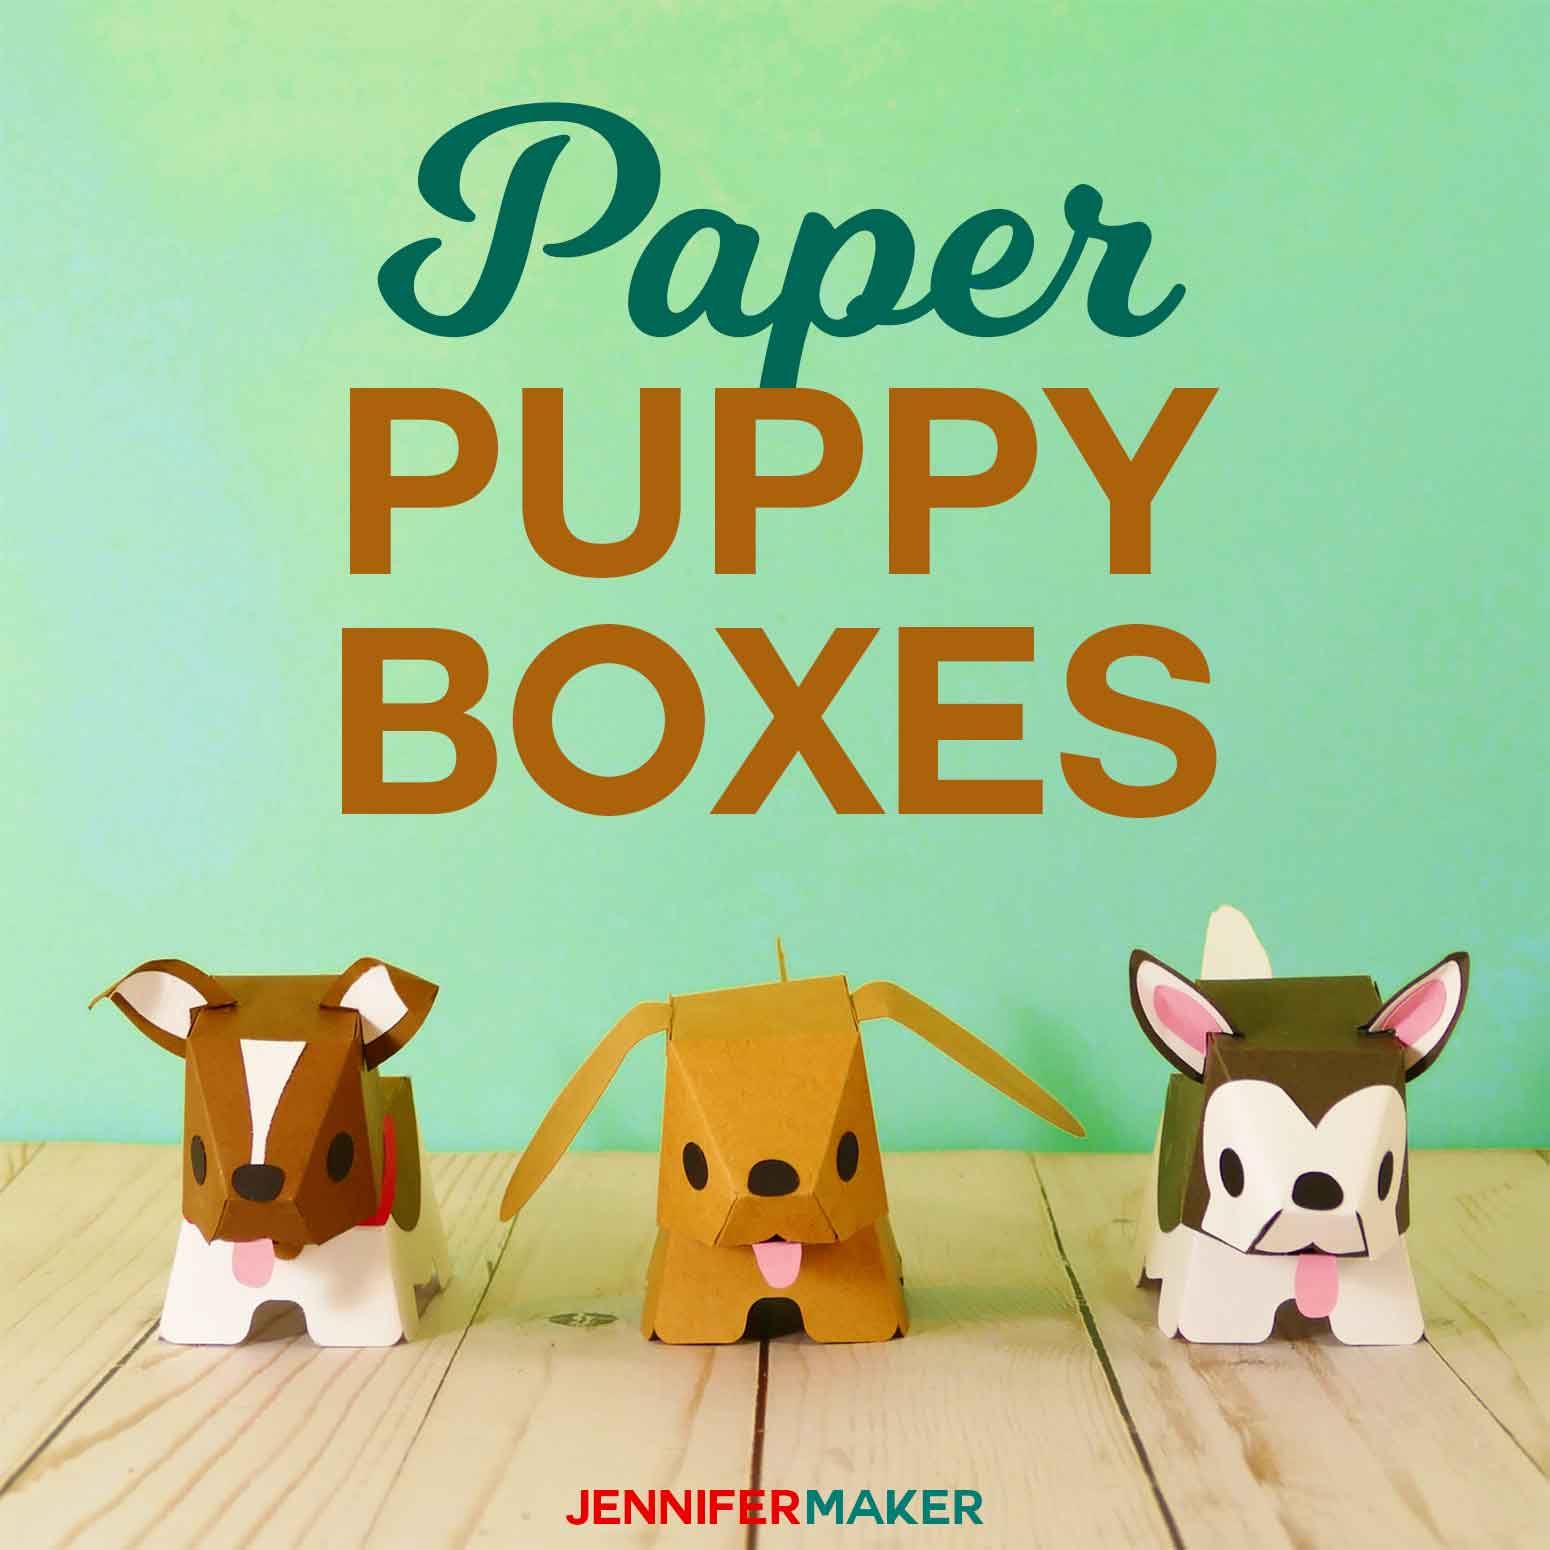 How to Make Paper Dog & Puppy Boxes #papercraft #gifts #cricut #svgfile #tutorial